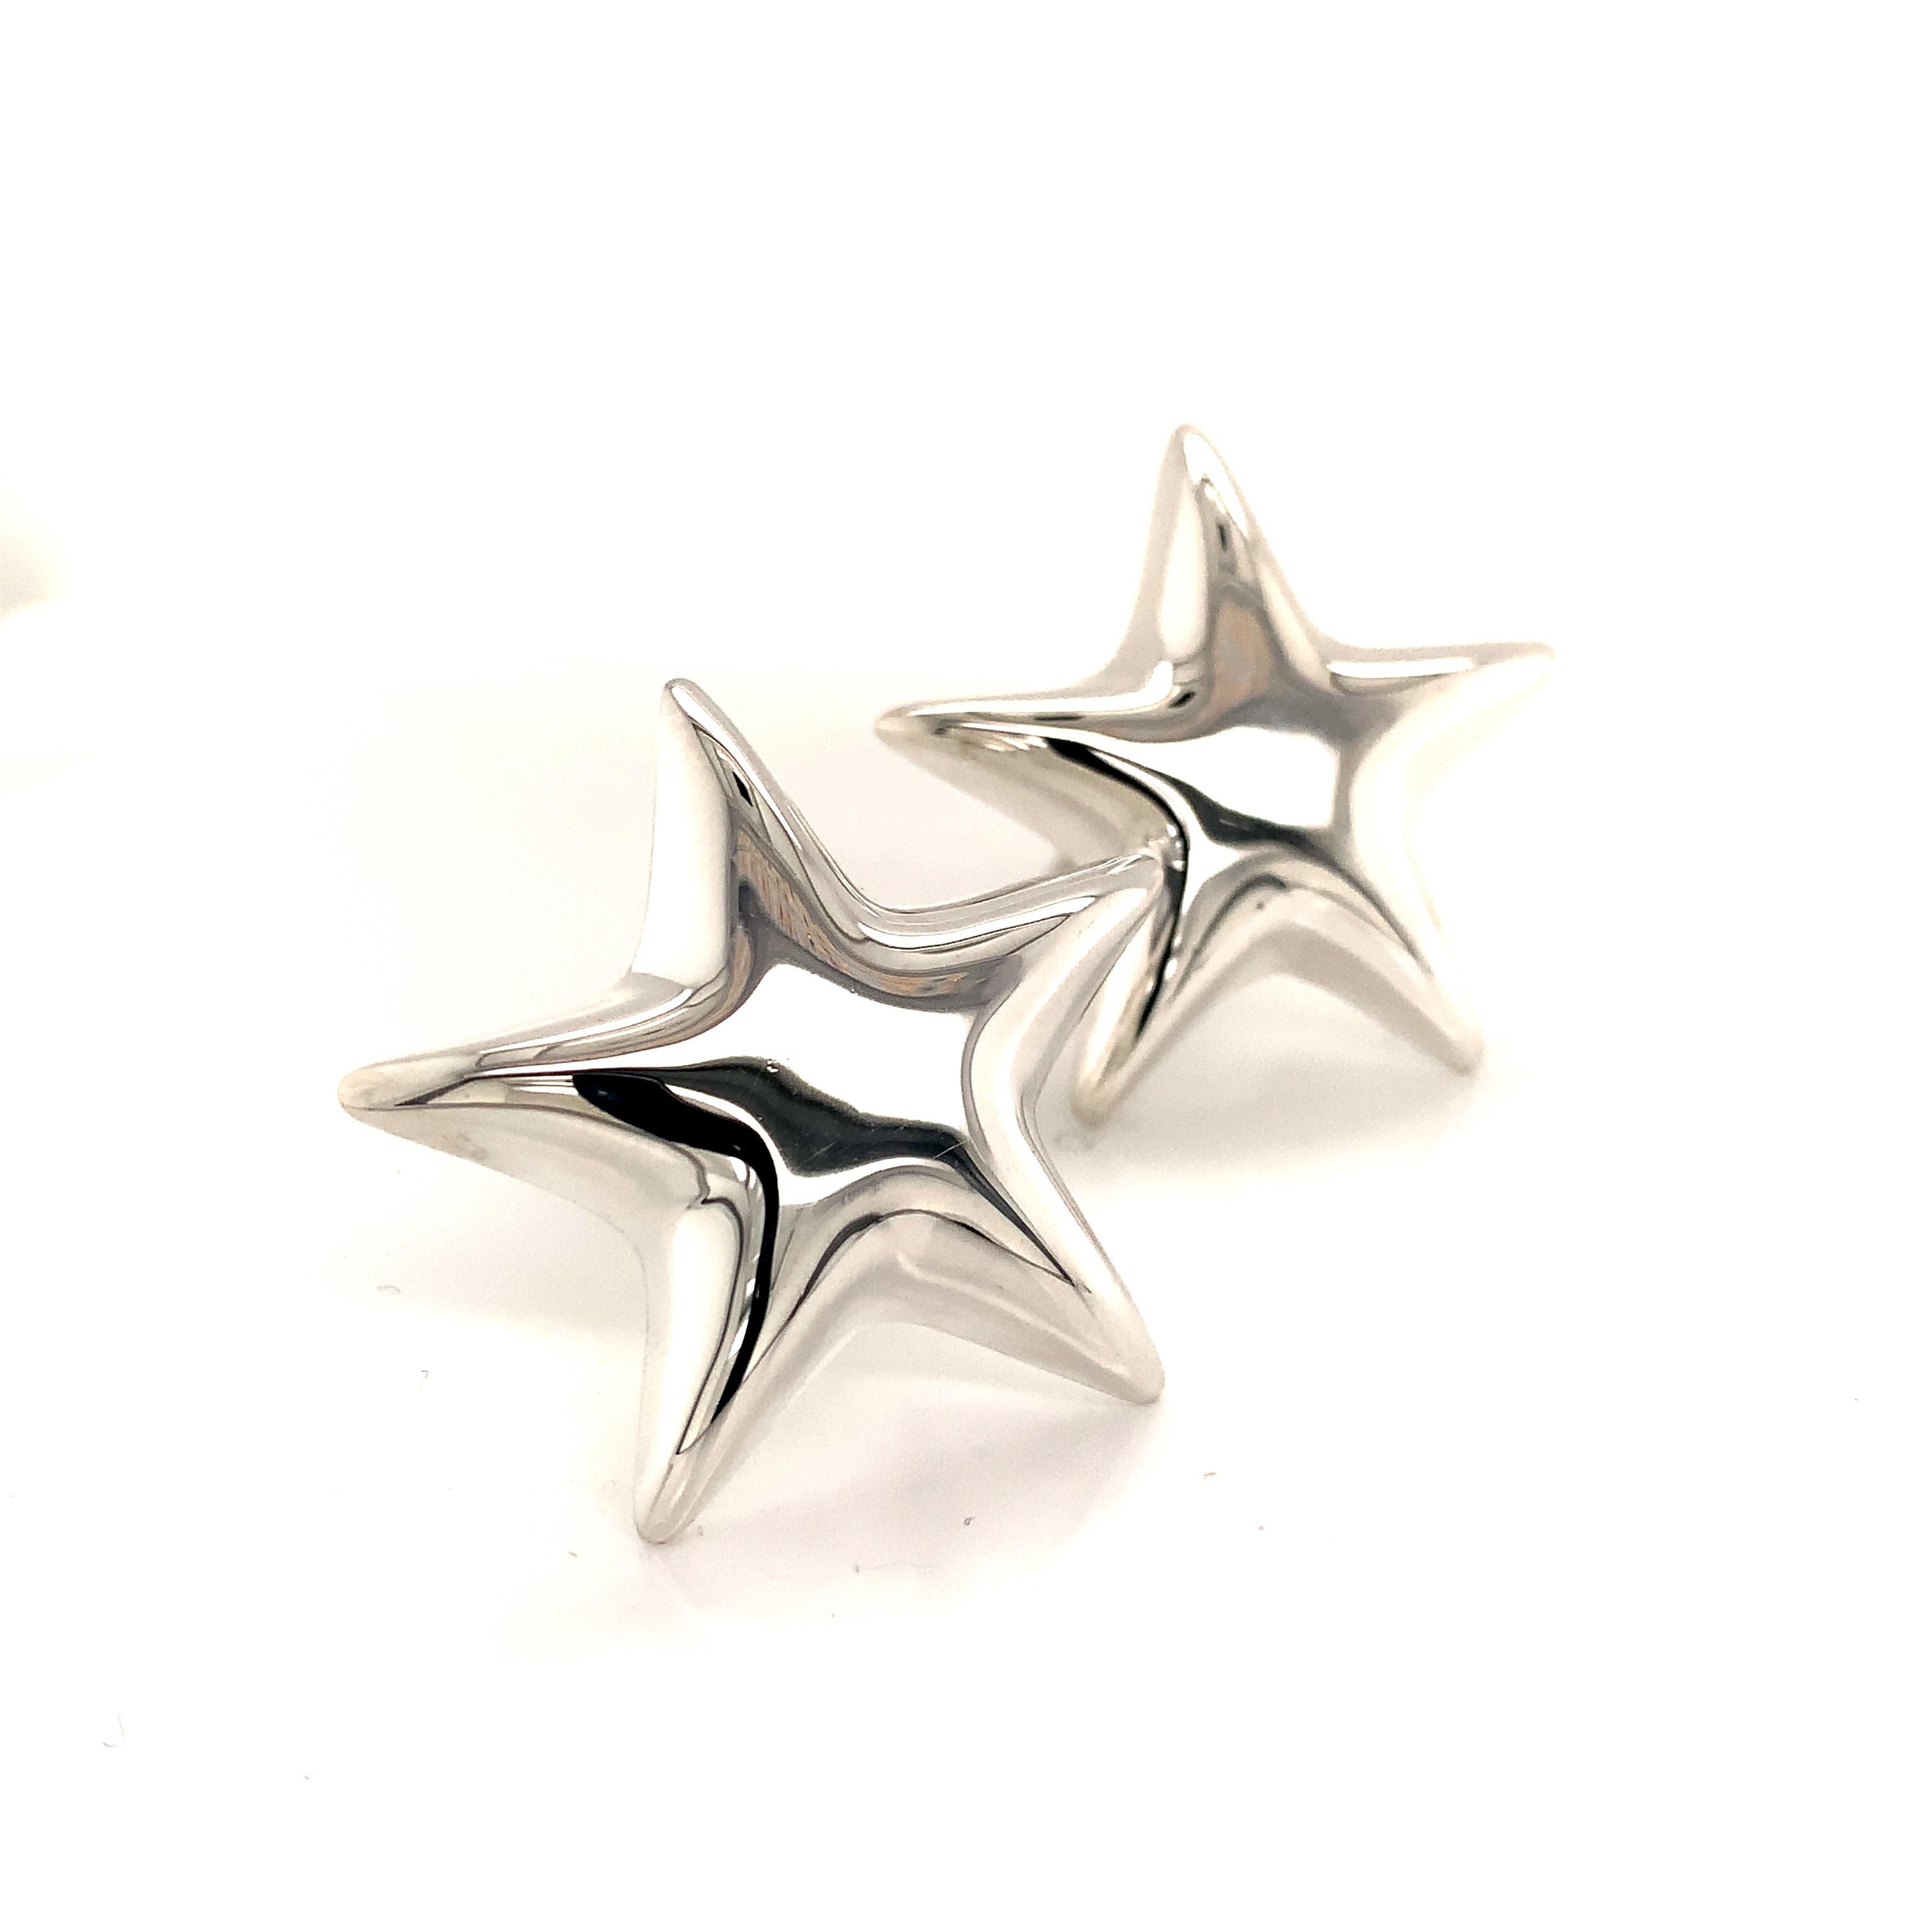 Tiffany & Co Estate Omega Back Star Earrings Sterling Silver 18.9 Grams TIF92

(No Piercing)
 
These elegant Authentic Tiffany & Co star earrings have a weight of 18.9 Grams.

TRUSTED SELLER SINCE 2002
 
PLEASE SEE OUR HUNDREDS OF POSITIVE FEEDBACKS